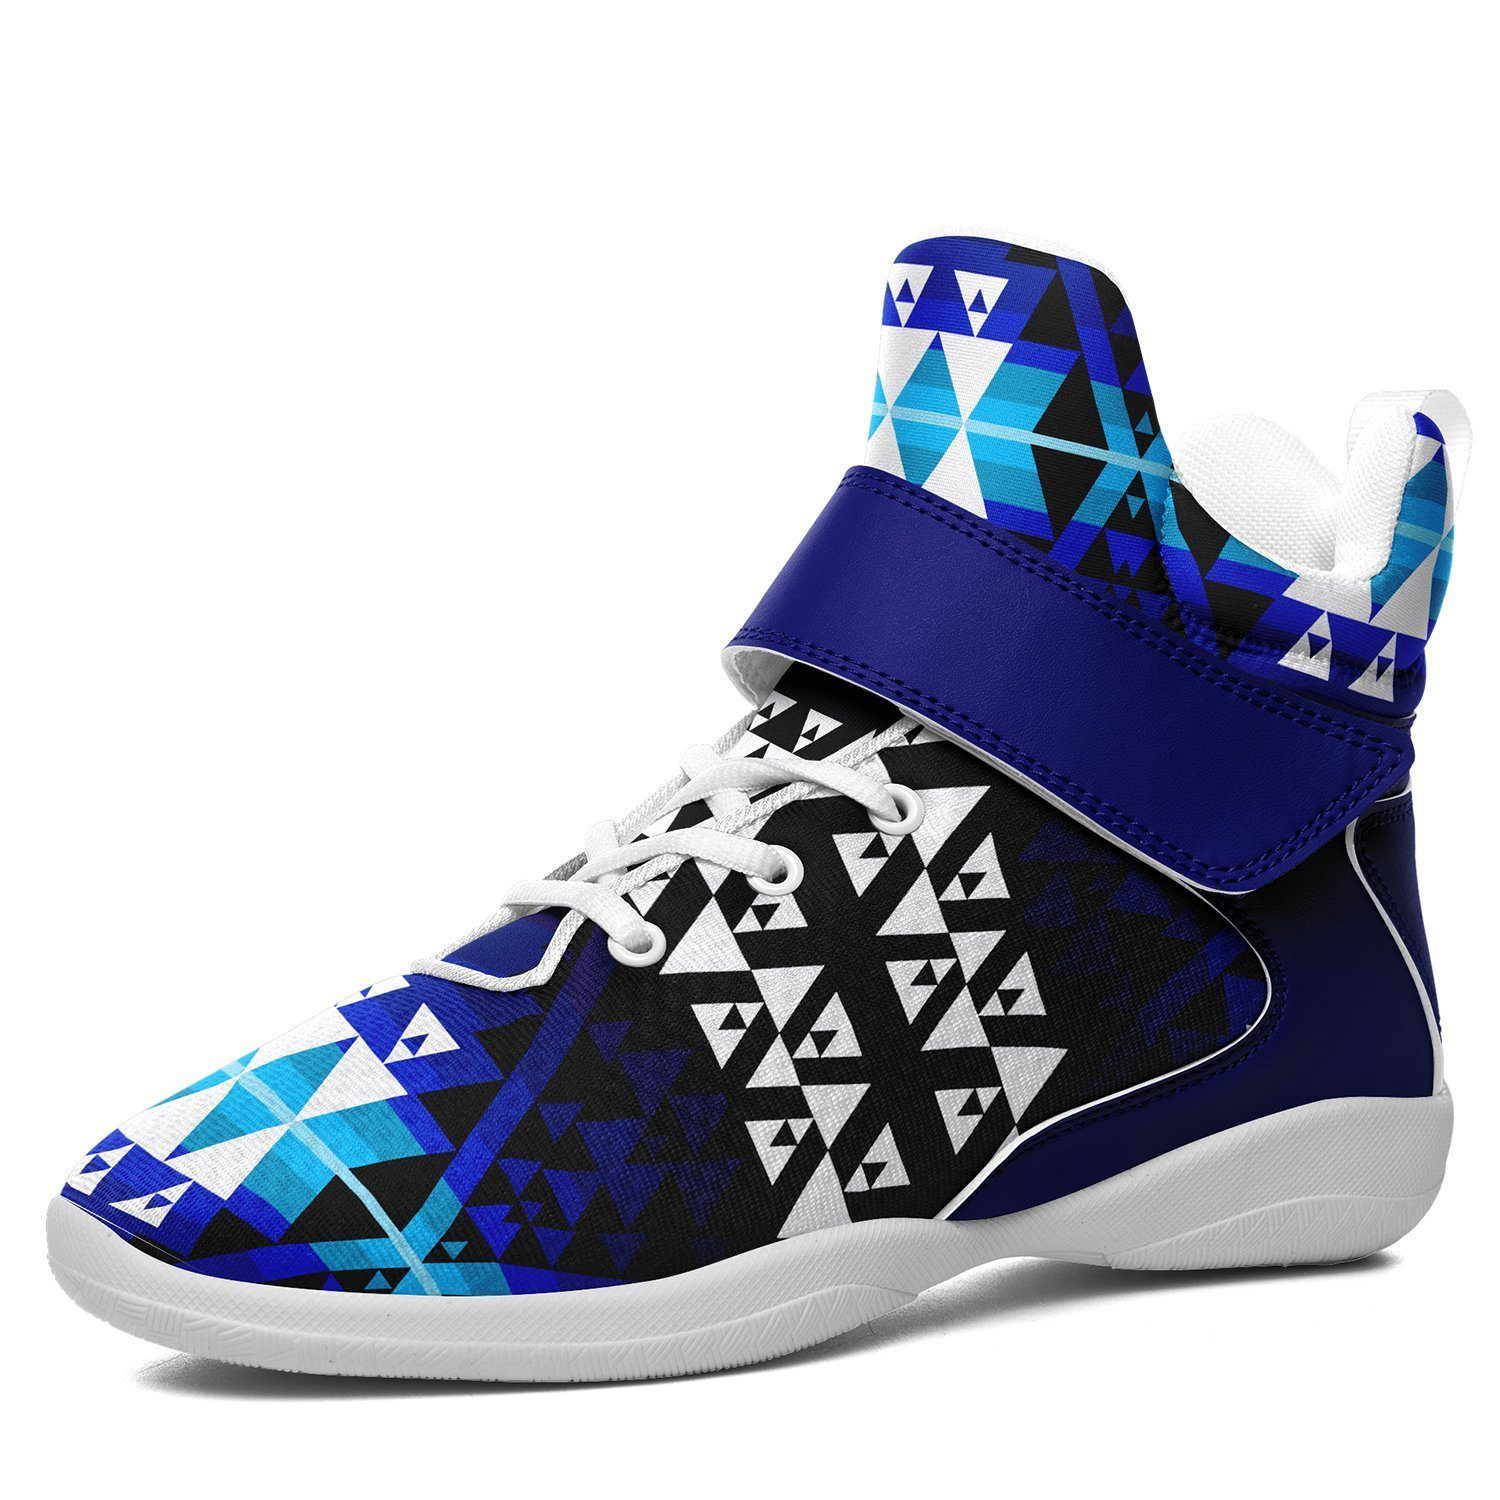 Writing on Stone Night Watch Ipottaa Basketball / Sport High Top Shoes - White Sole 49 Dzine US Men 7 / EUR 40 White Sole with Blue Strap 